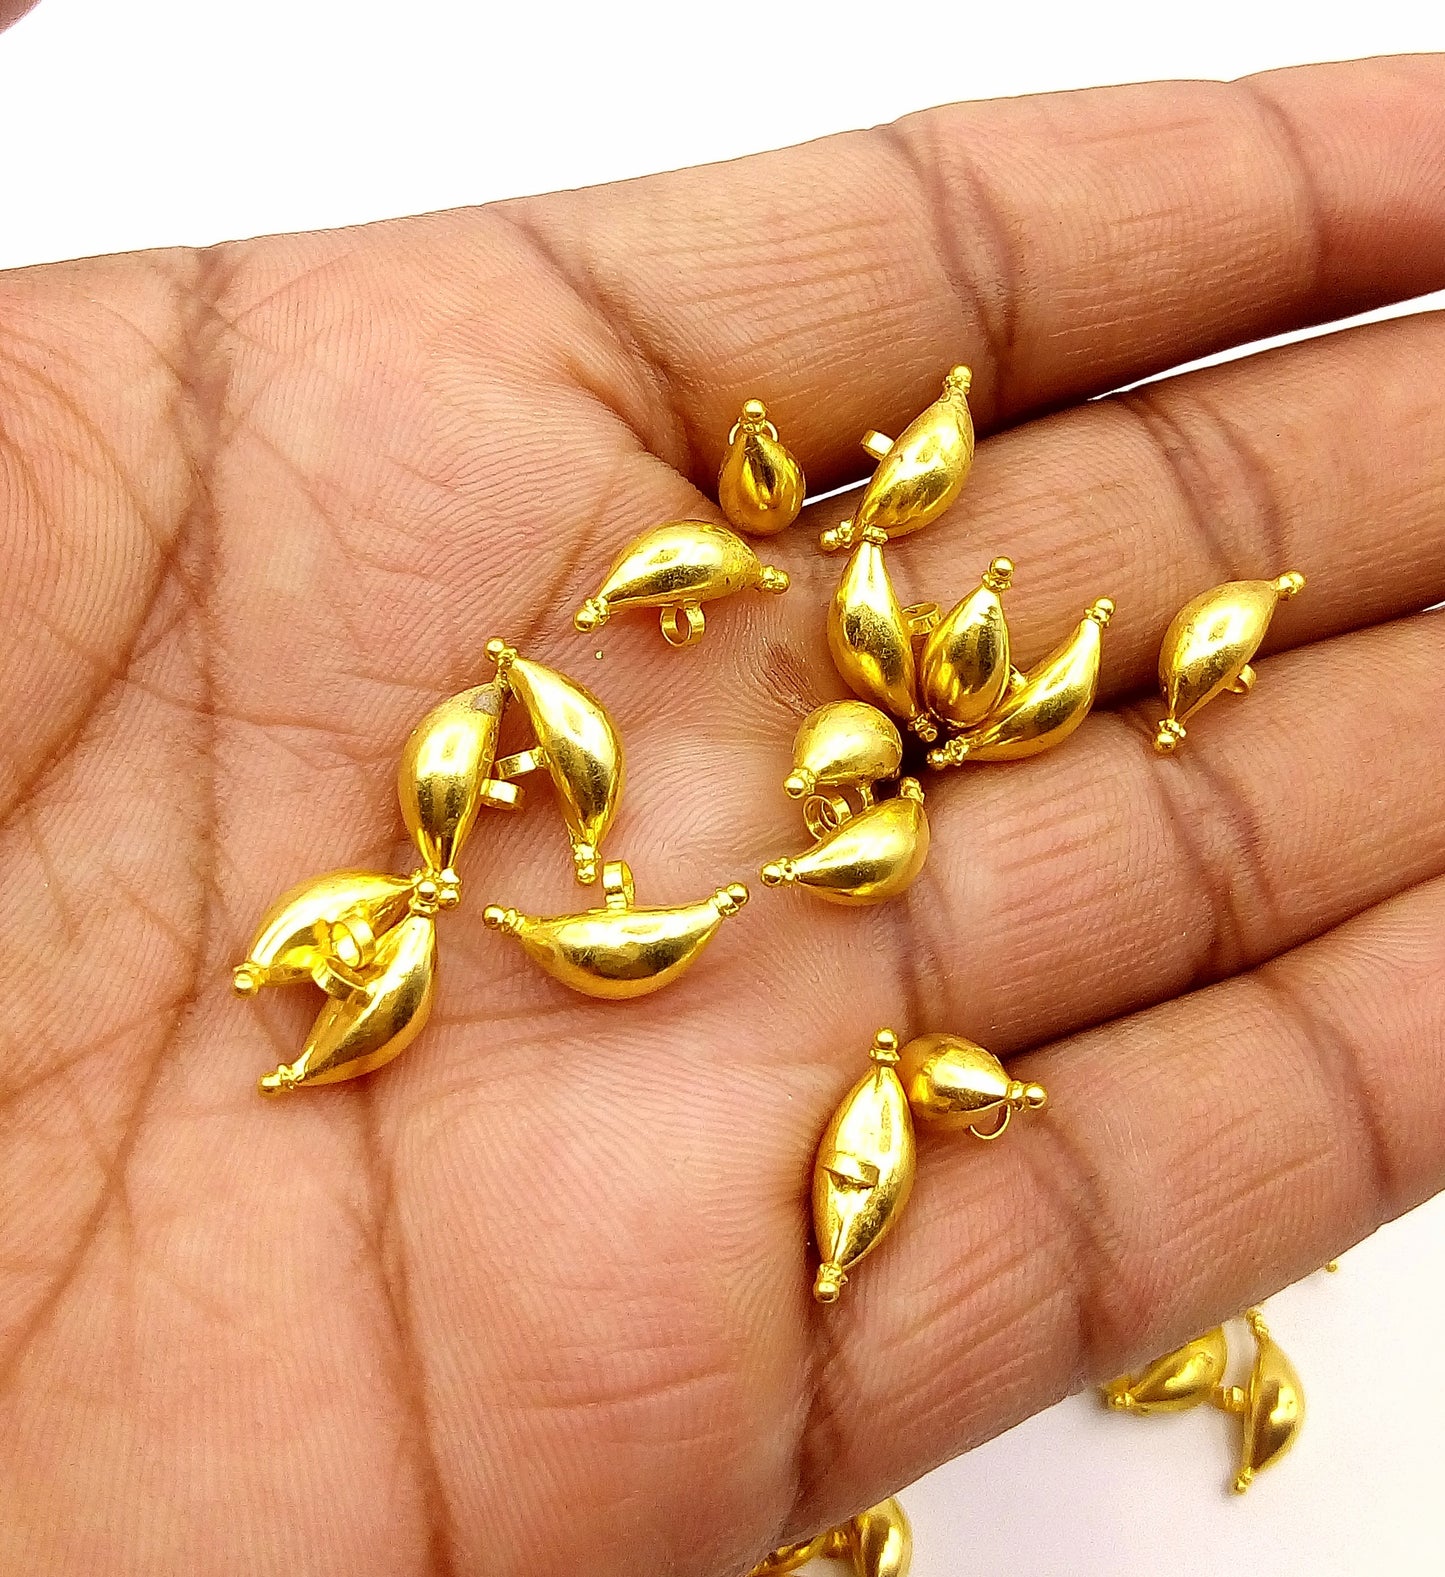 20 pieces Vintage antique handmade 18k yellow gold loose  small amulets pendant style Tribal jewelry from rajasthan india - TRIBAL ORNAMENTS